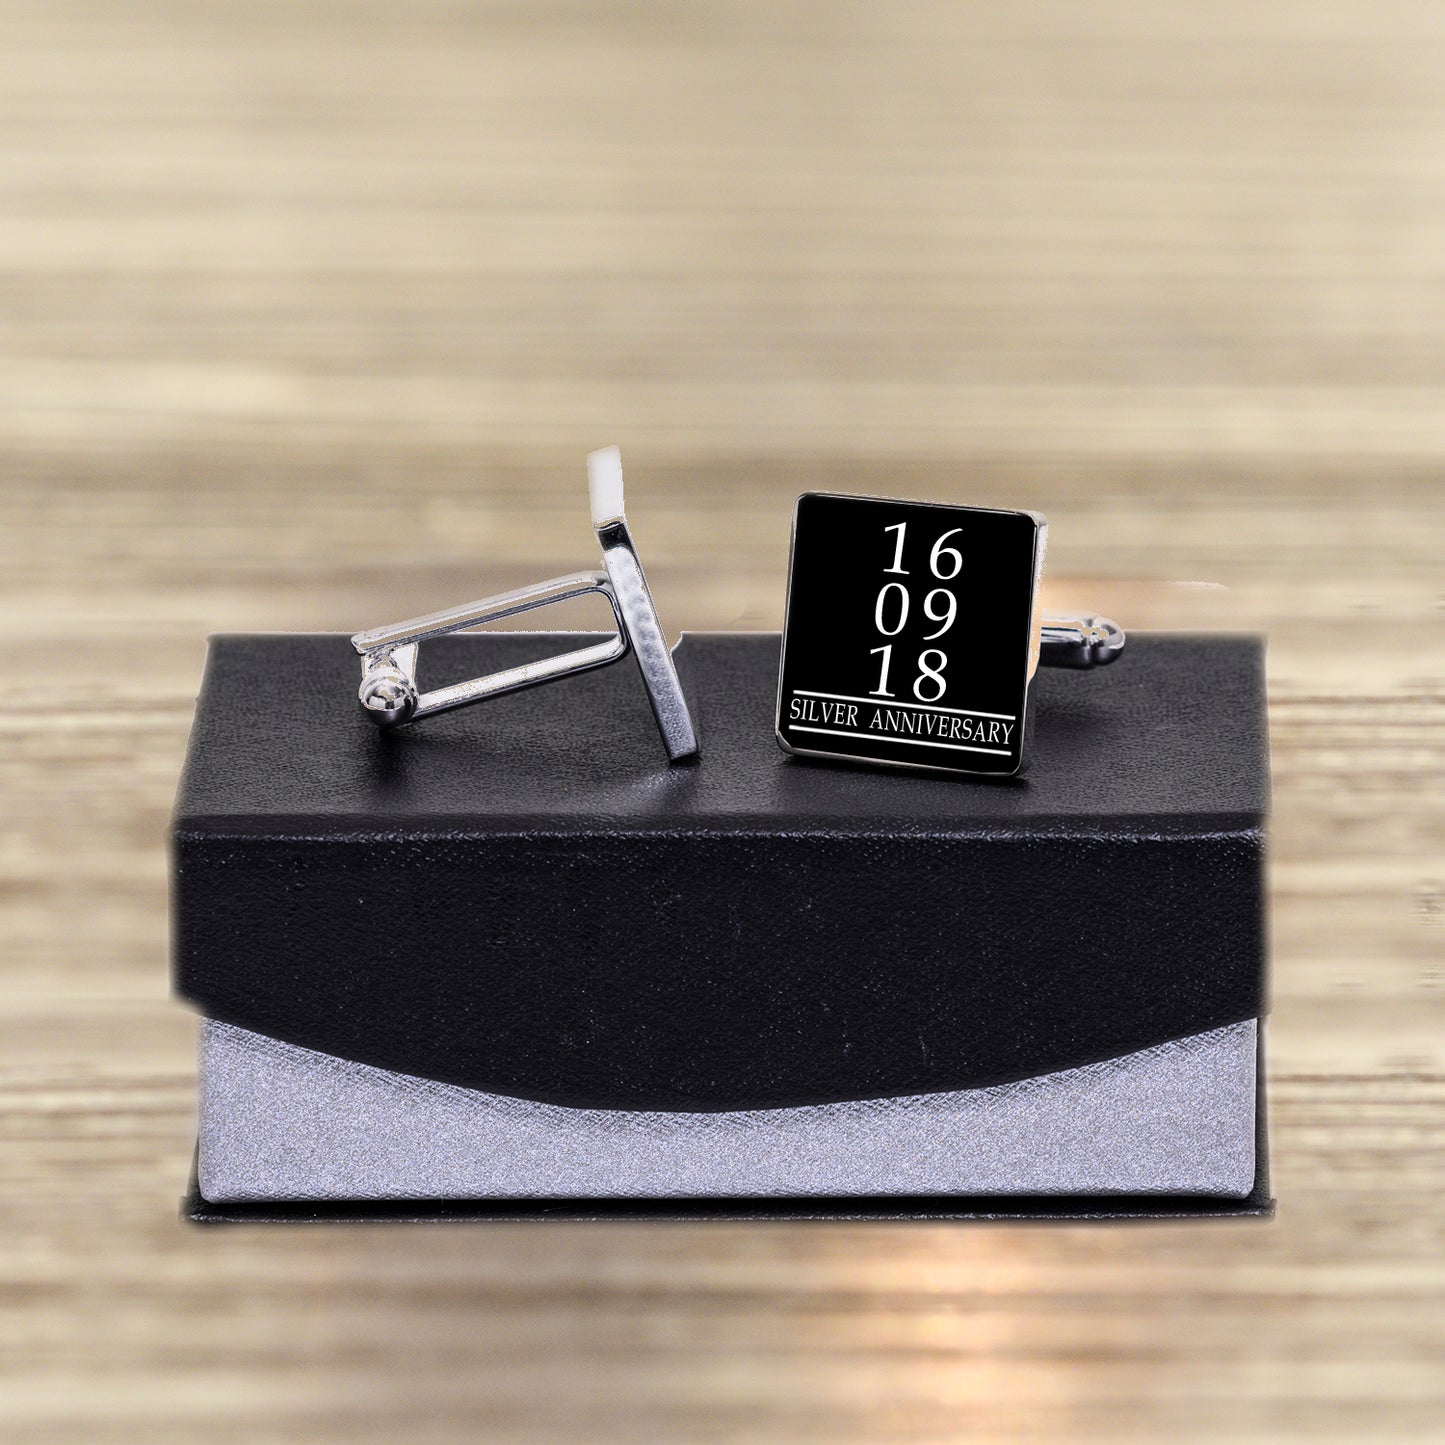 Personalised Special Date/s & Message Cufflinks - PCS Cufflinks & Gifts